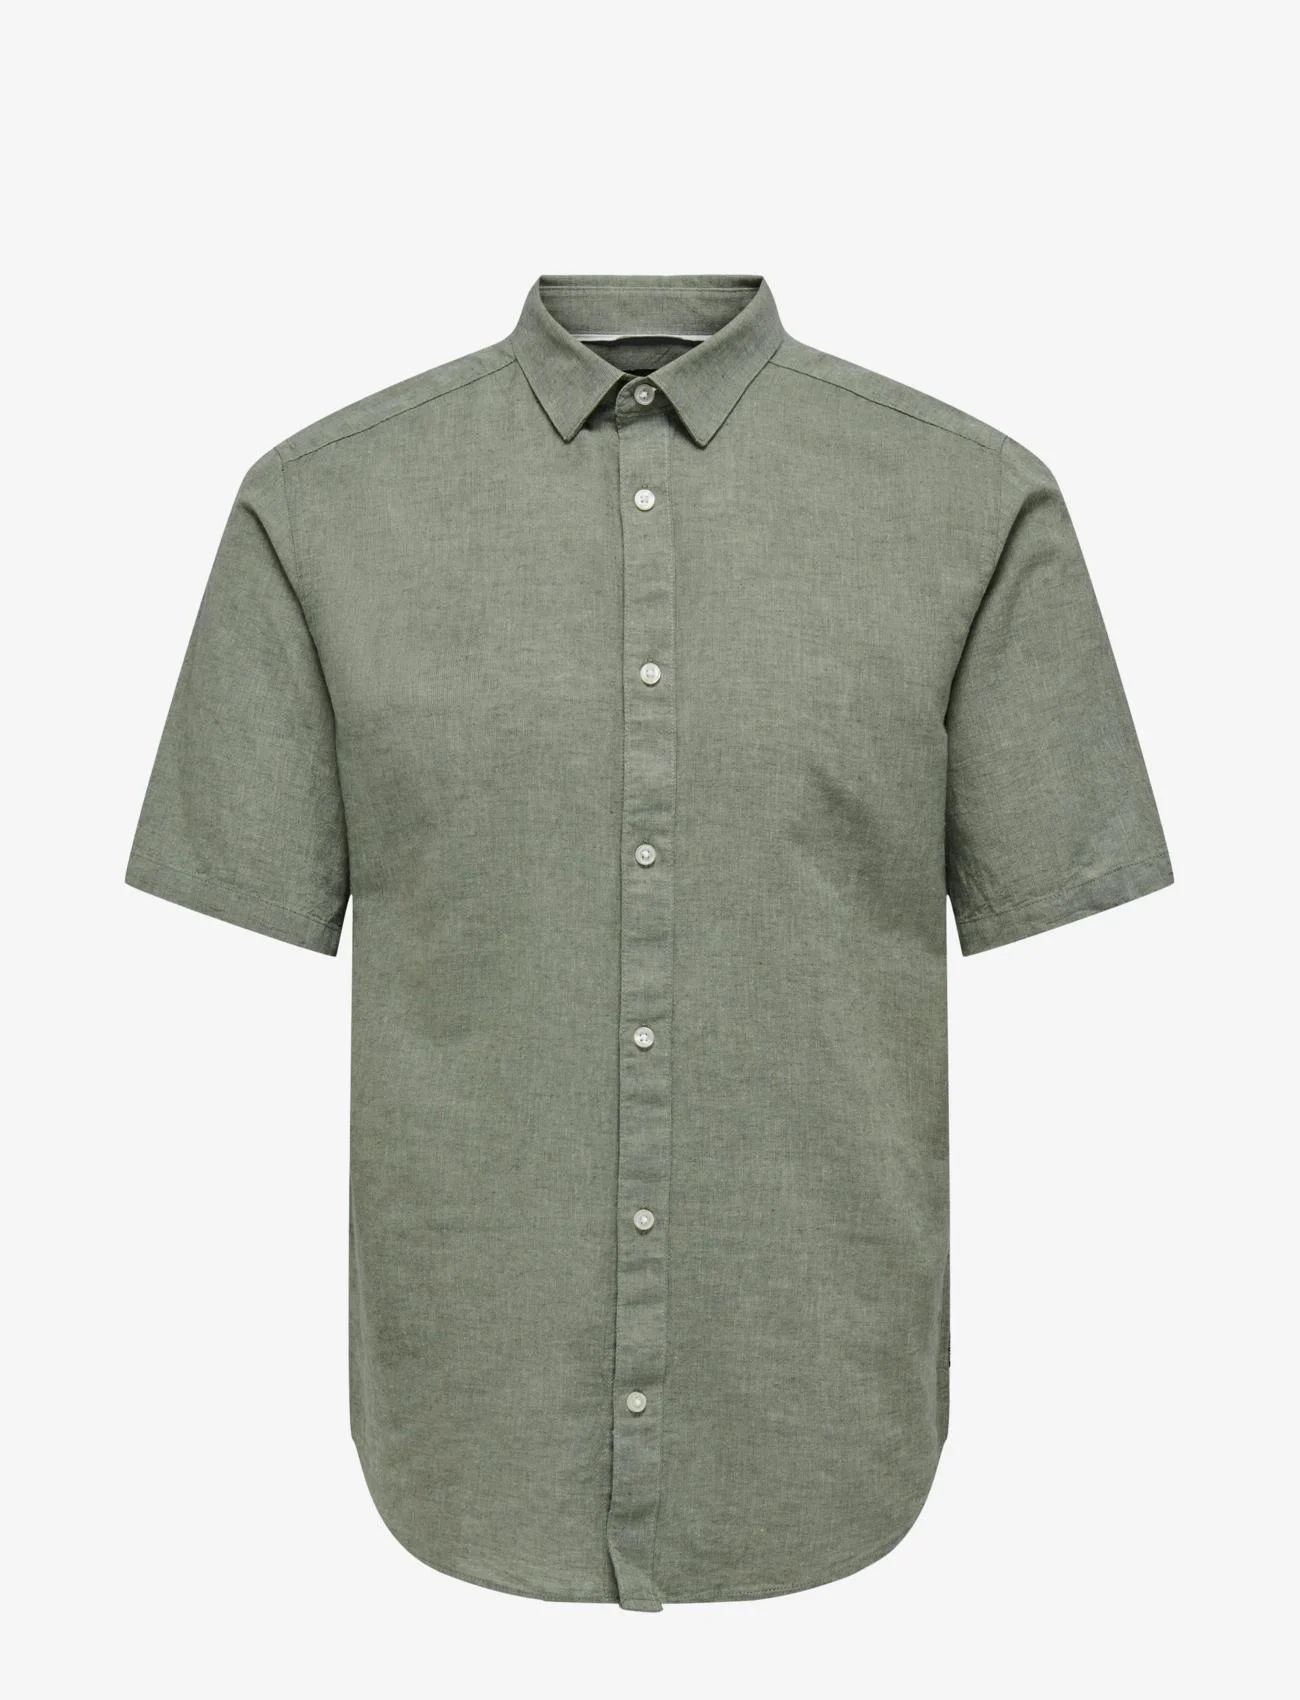 ONLY & SONS - ONSCAIDEN SS SOLID LINEN SHIRT NOOS - madalaimad hinnad - swamp - 0